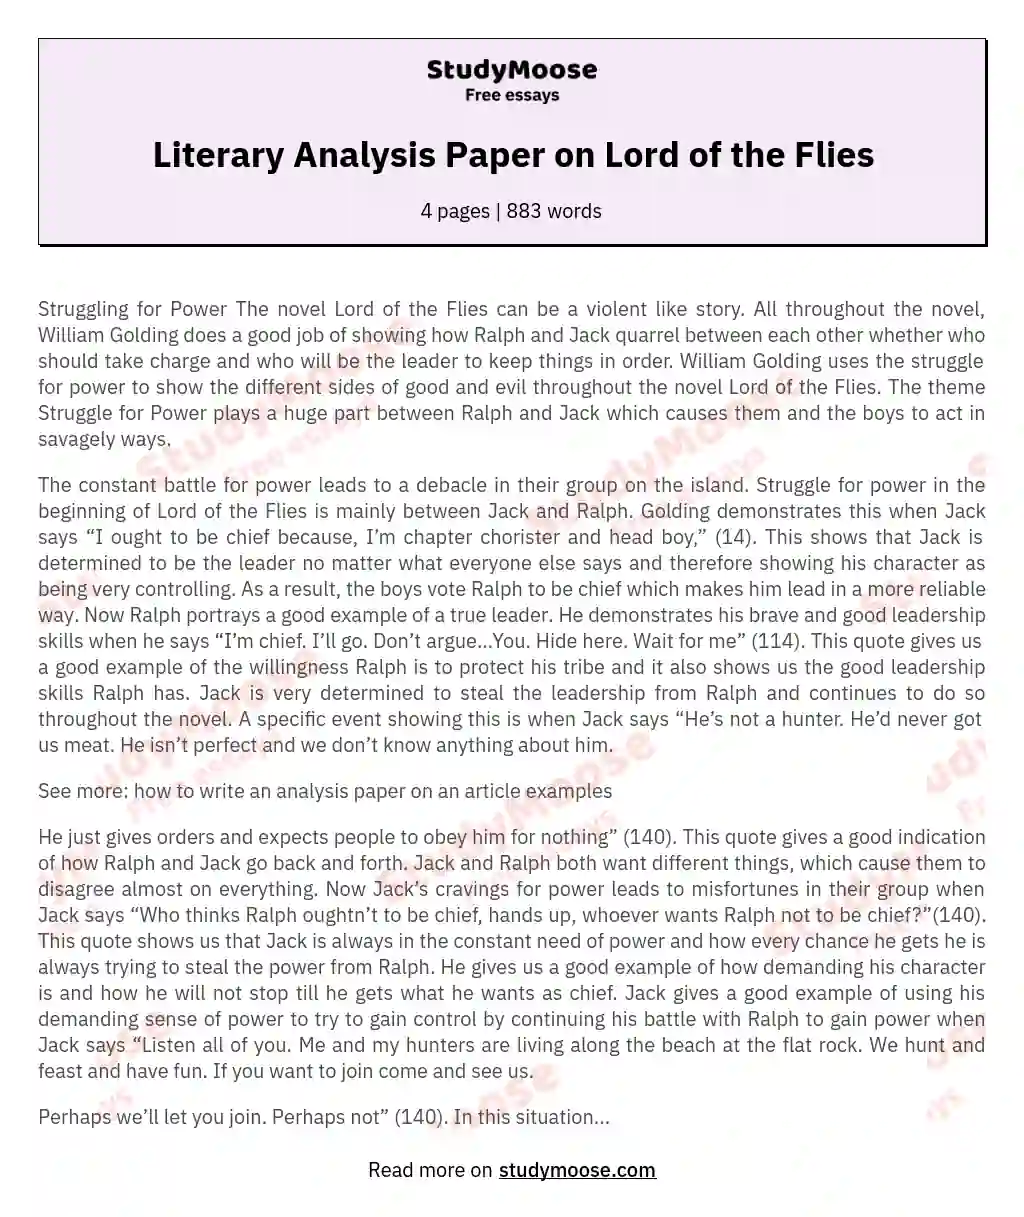 Literary Analysis Paper on Lord of the Flies